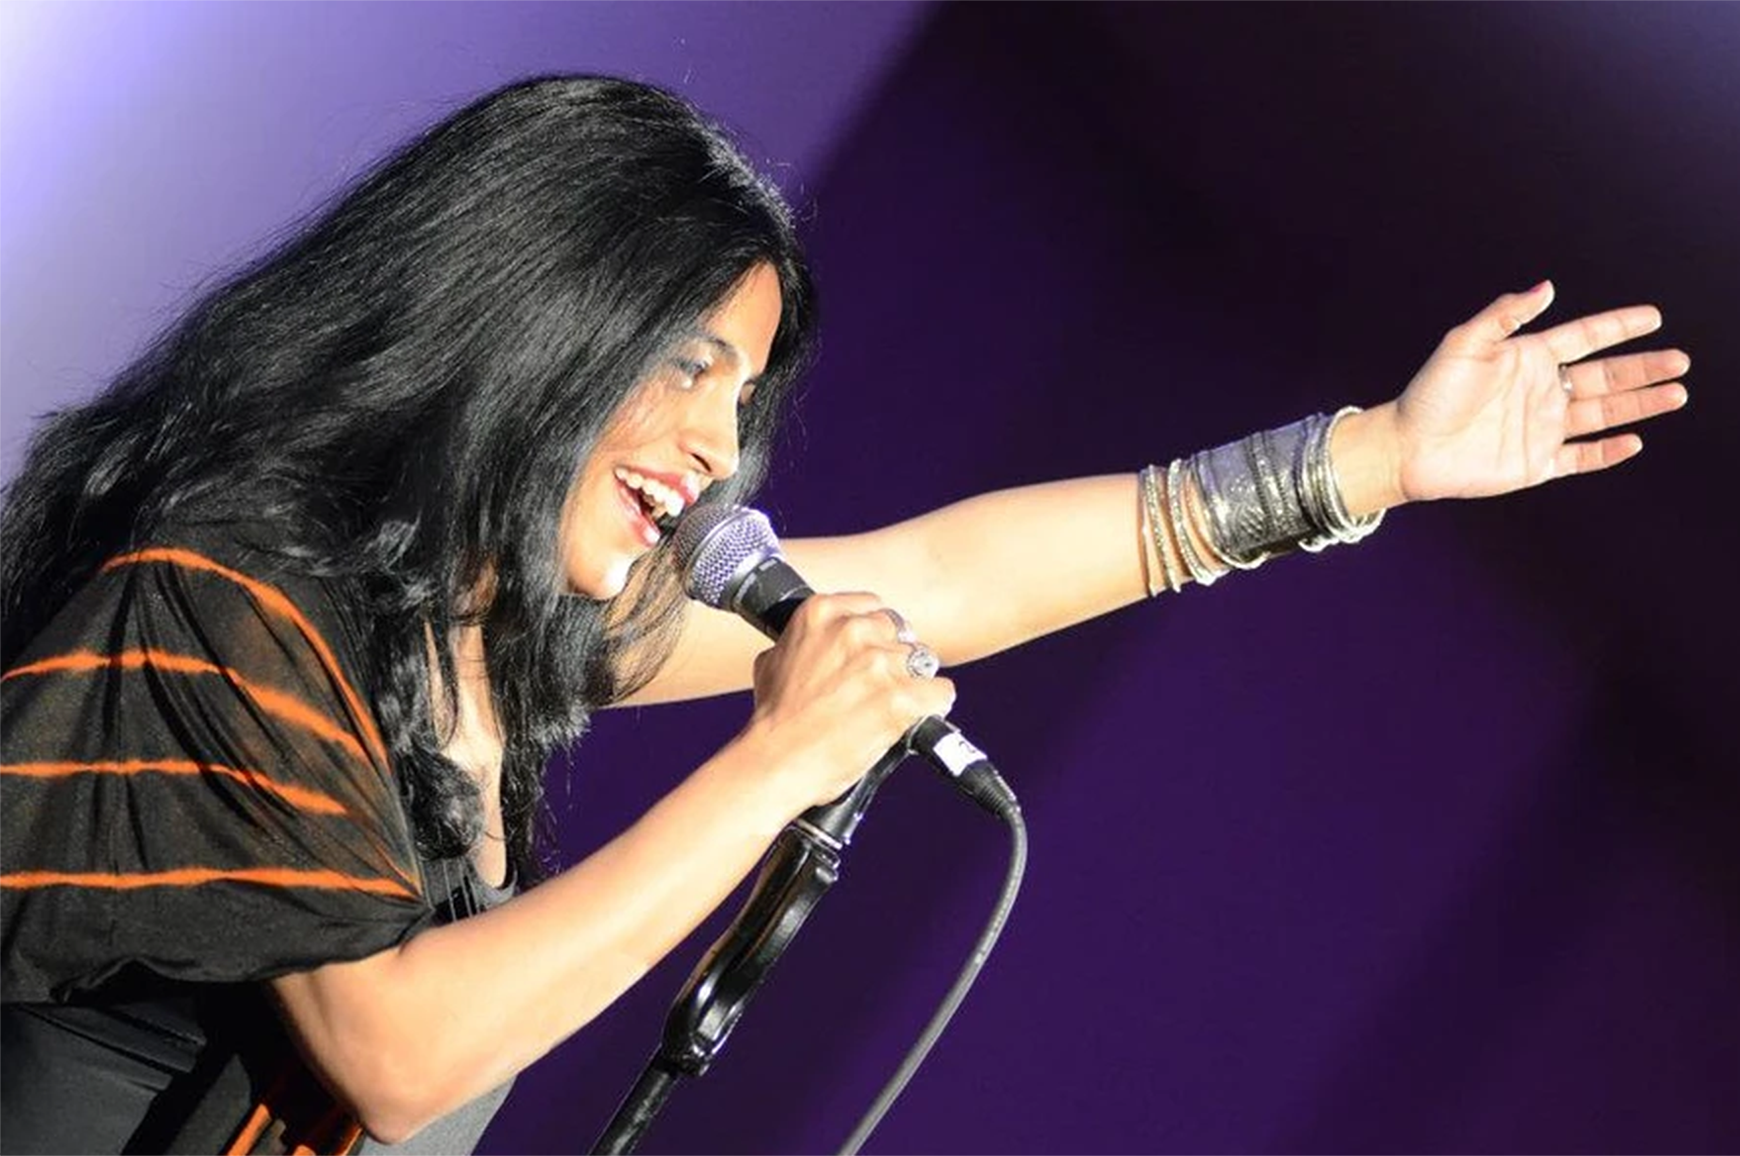 Image of singer Falu holding microphone singing with purple background